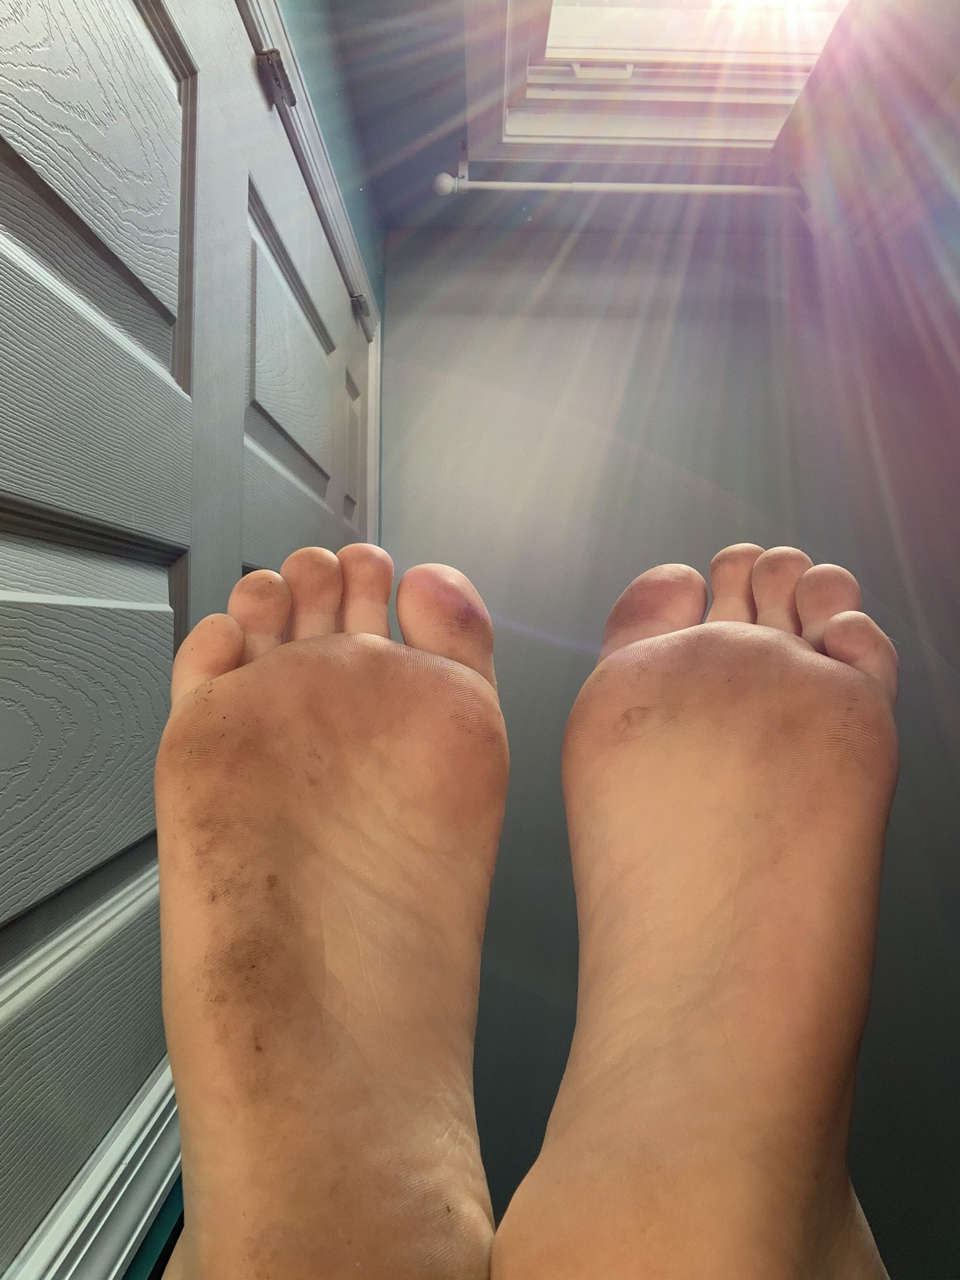 My Soles Are Dirty Come Lick Them Clean For Me Fee